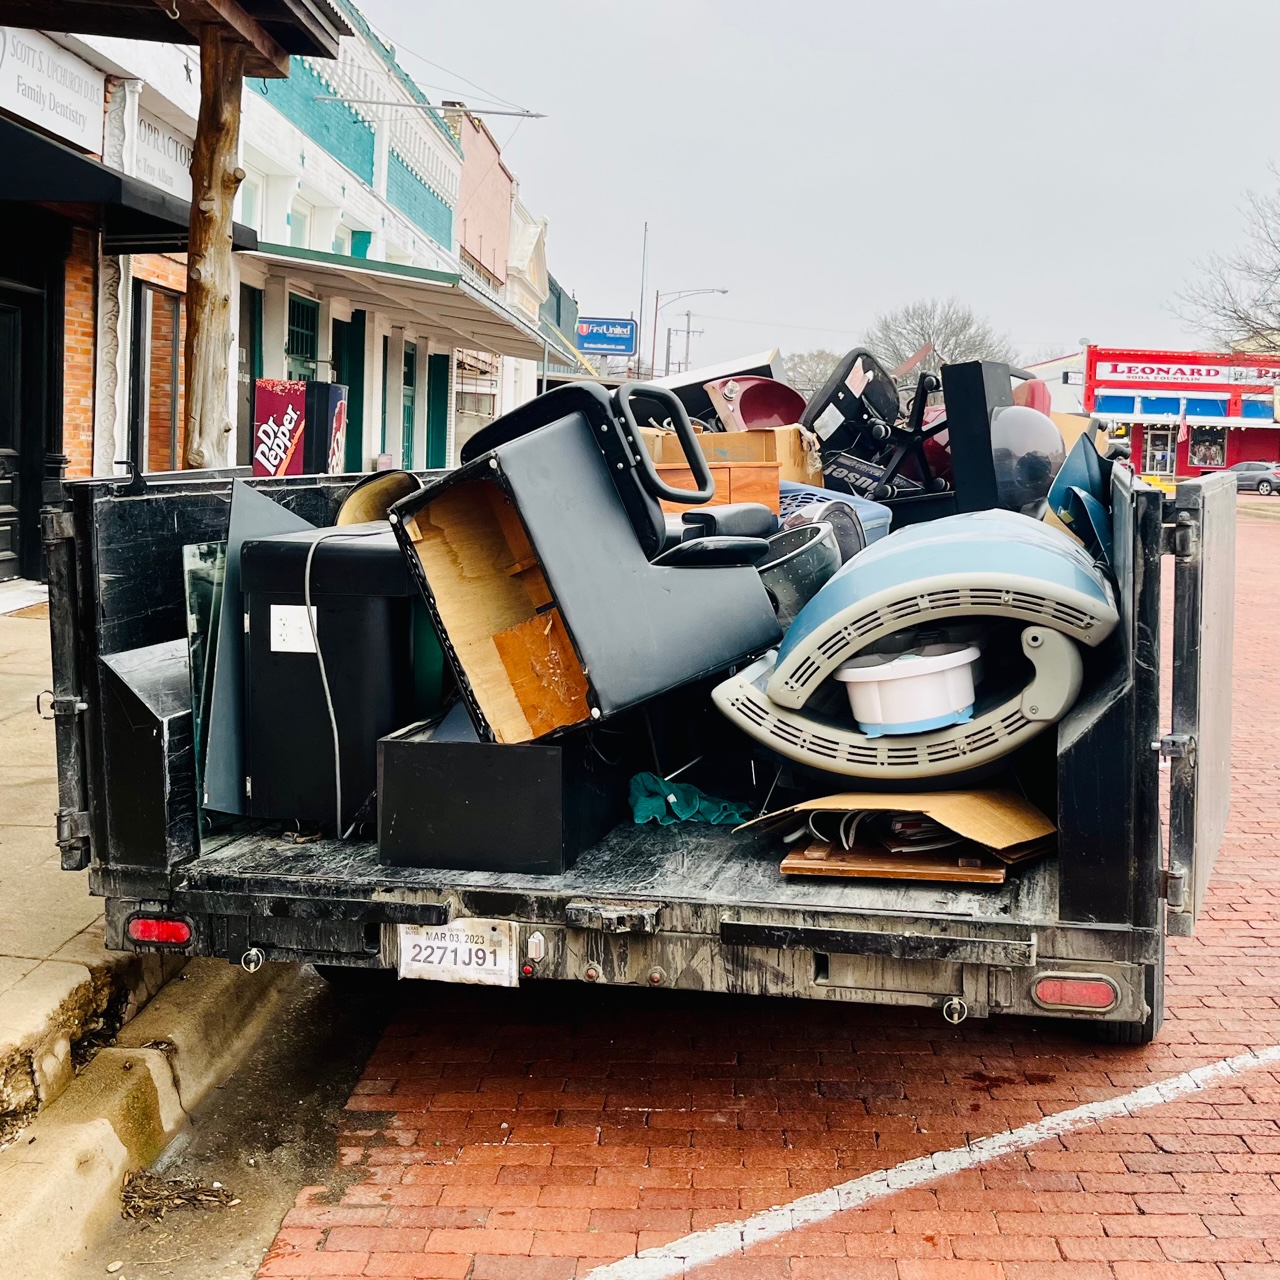 Junk Removal & Hauling in Northeast DFW Texas